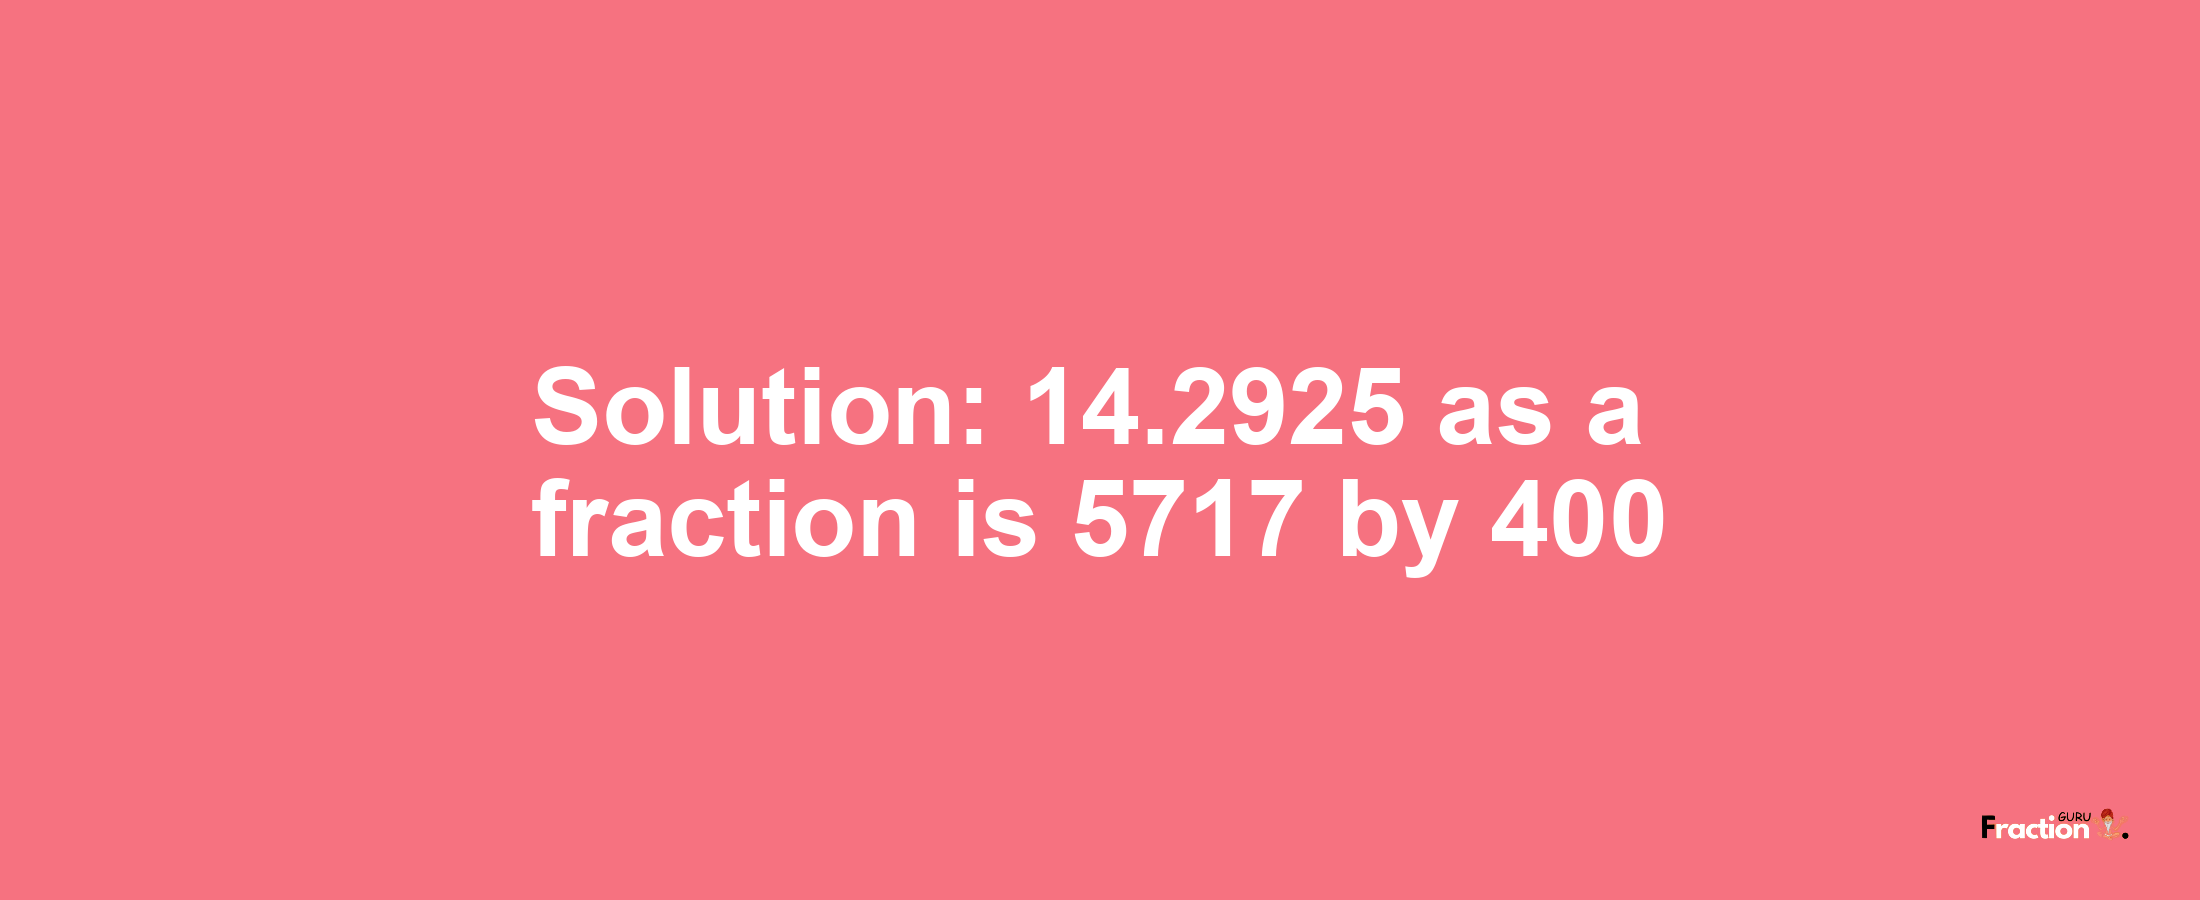 Solution:14.2925 as a fraction is 5717/400